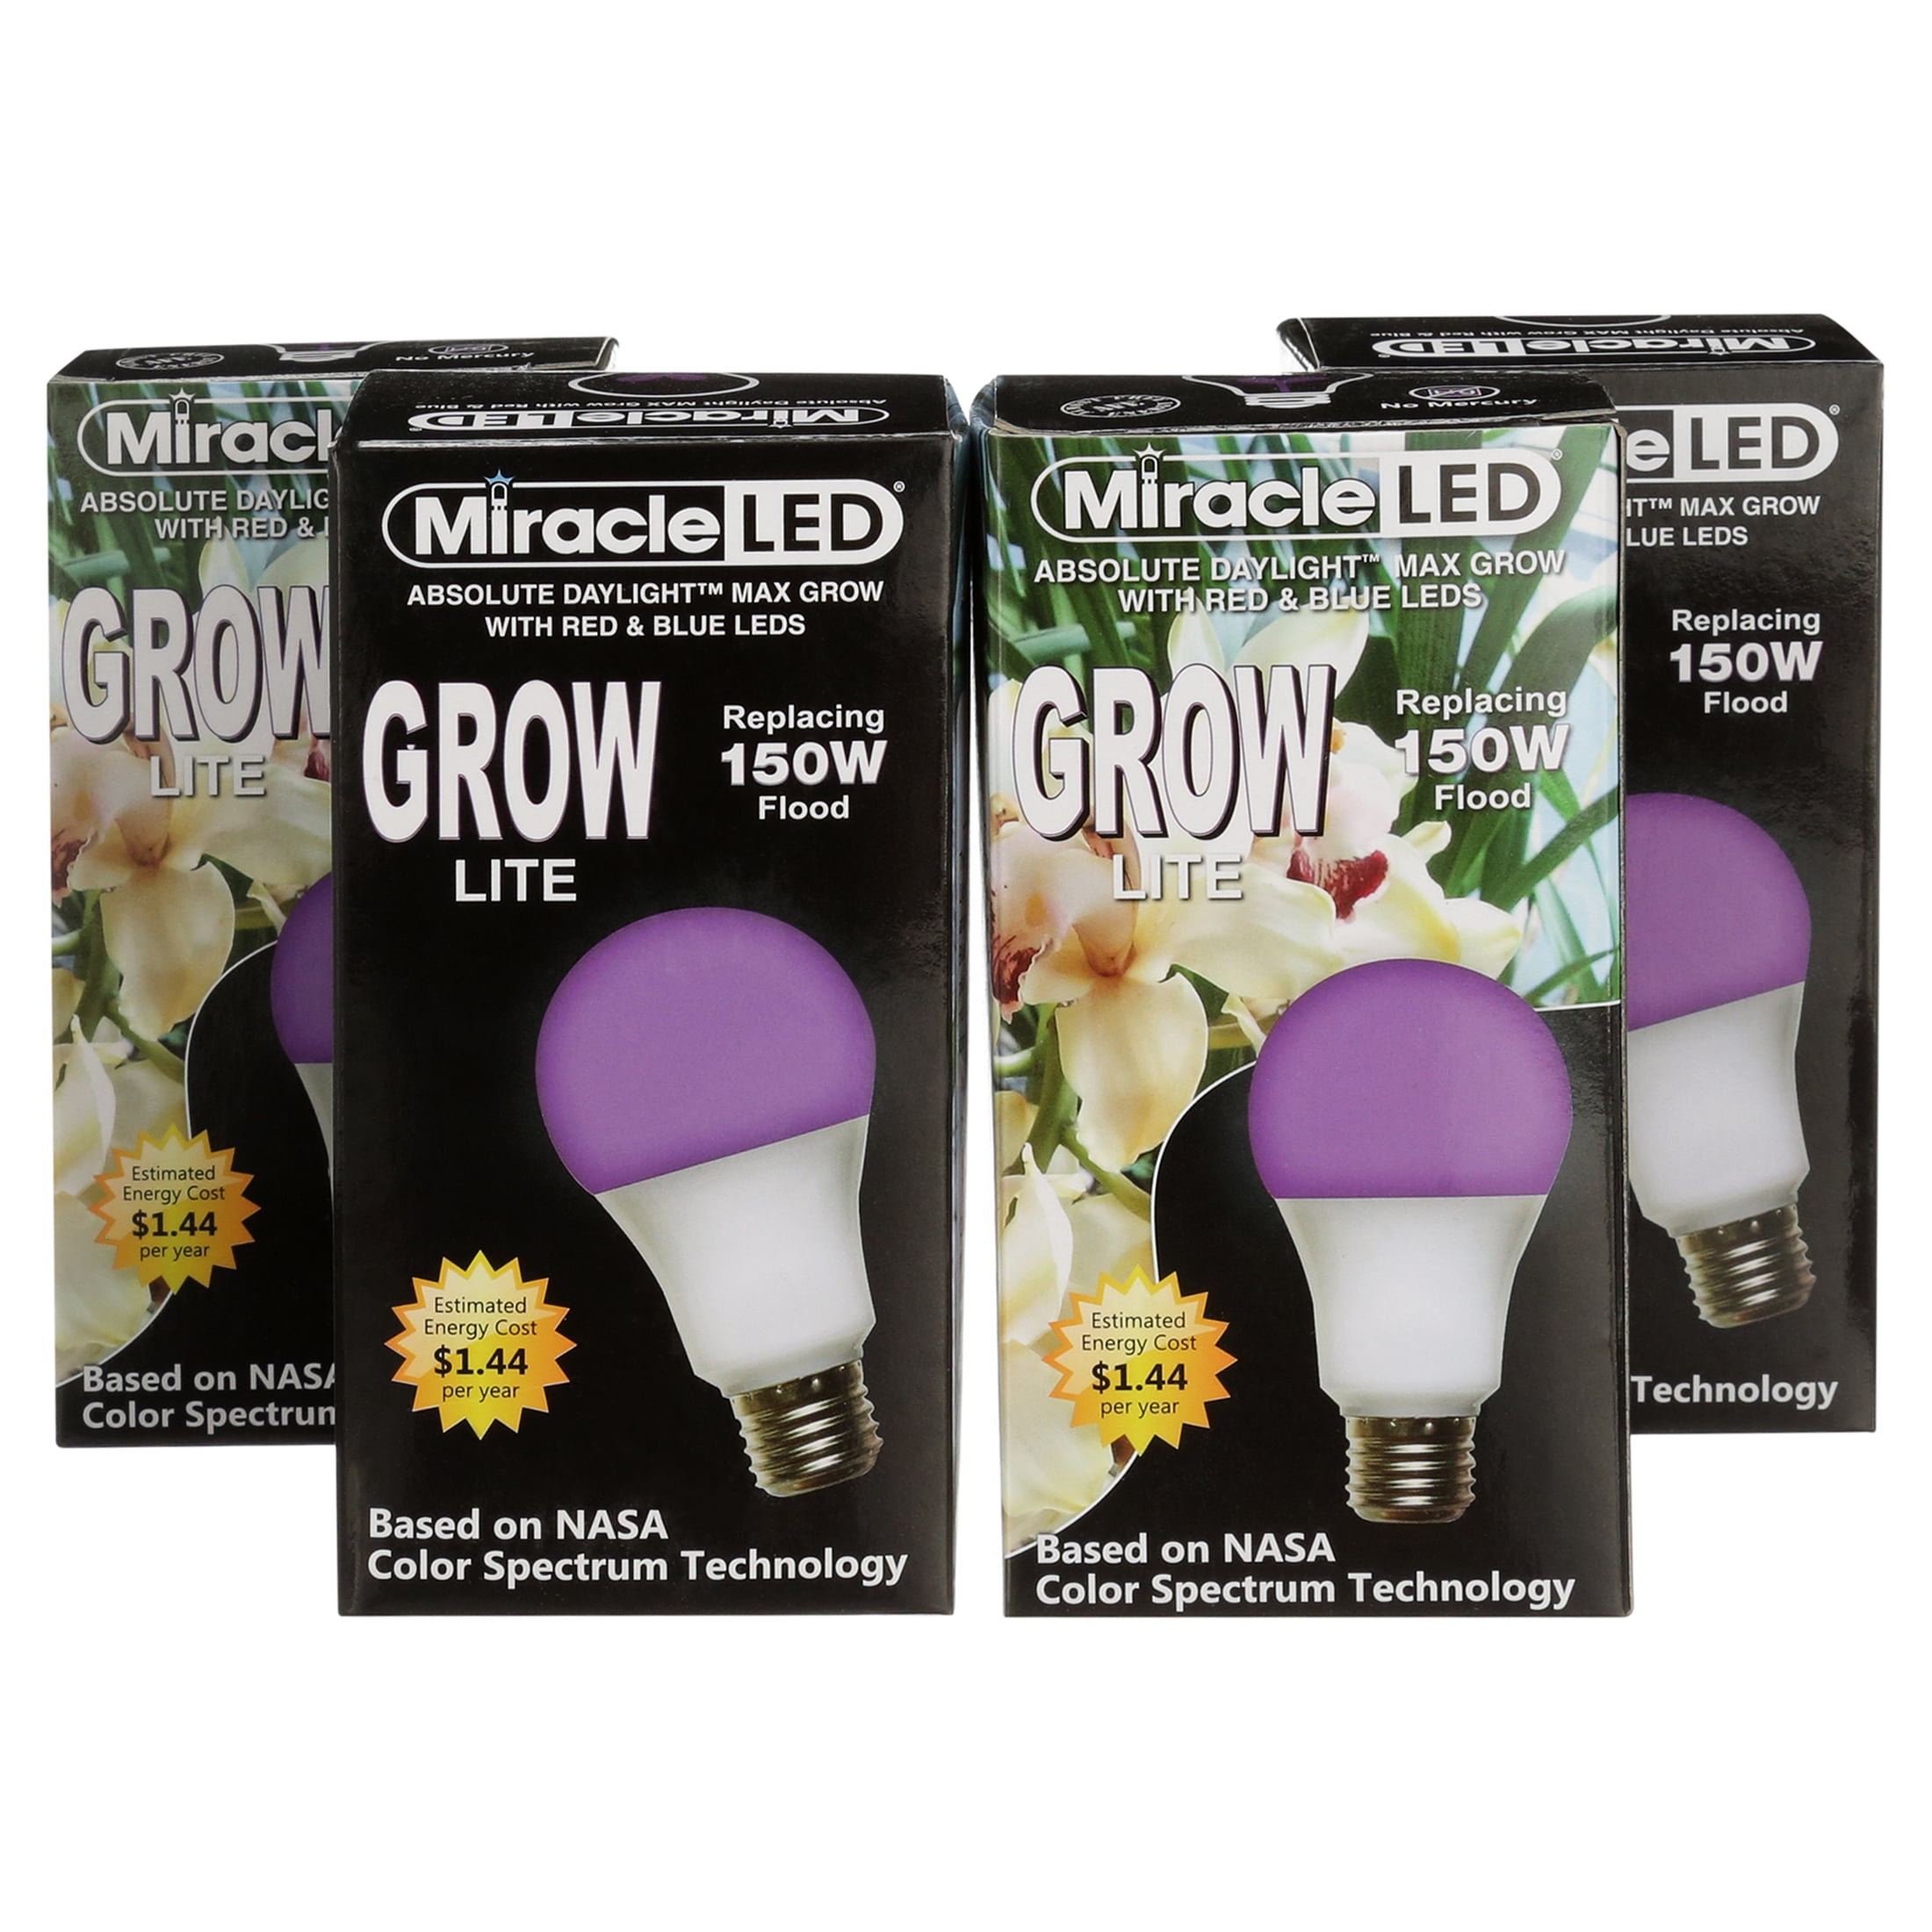 Replaces up to 150W 604273 2 Pack Miracle LED Commercial Hydroponic Ultra Grow Lite Daylight White Full Spectrum LED Indoor Plant Growing Light Bulb For DIY Horticulture & Indoor Gardening 